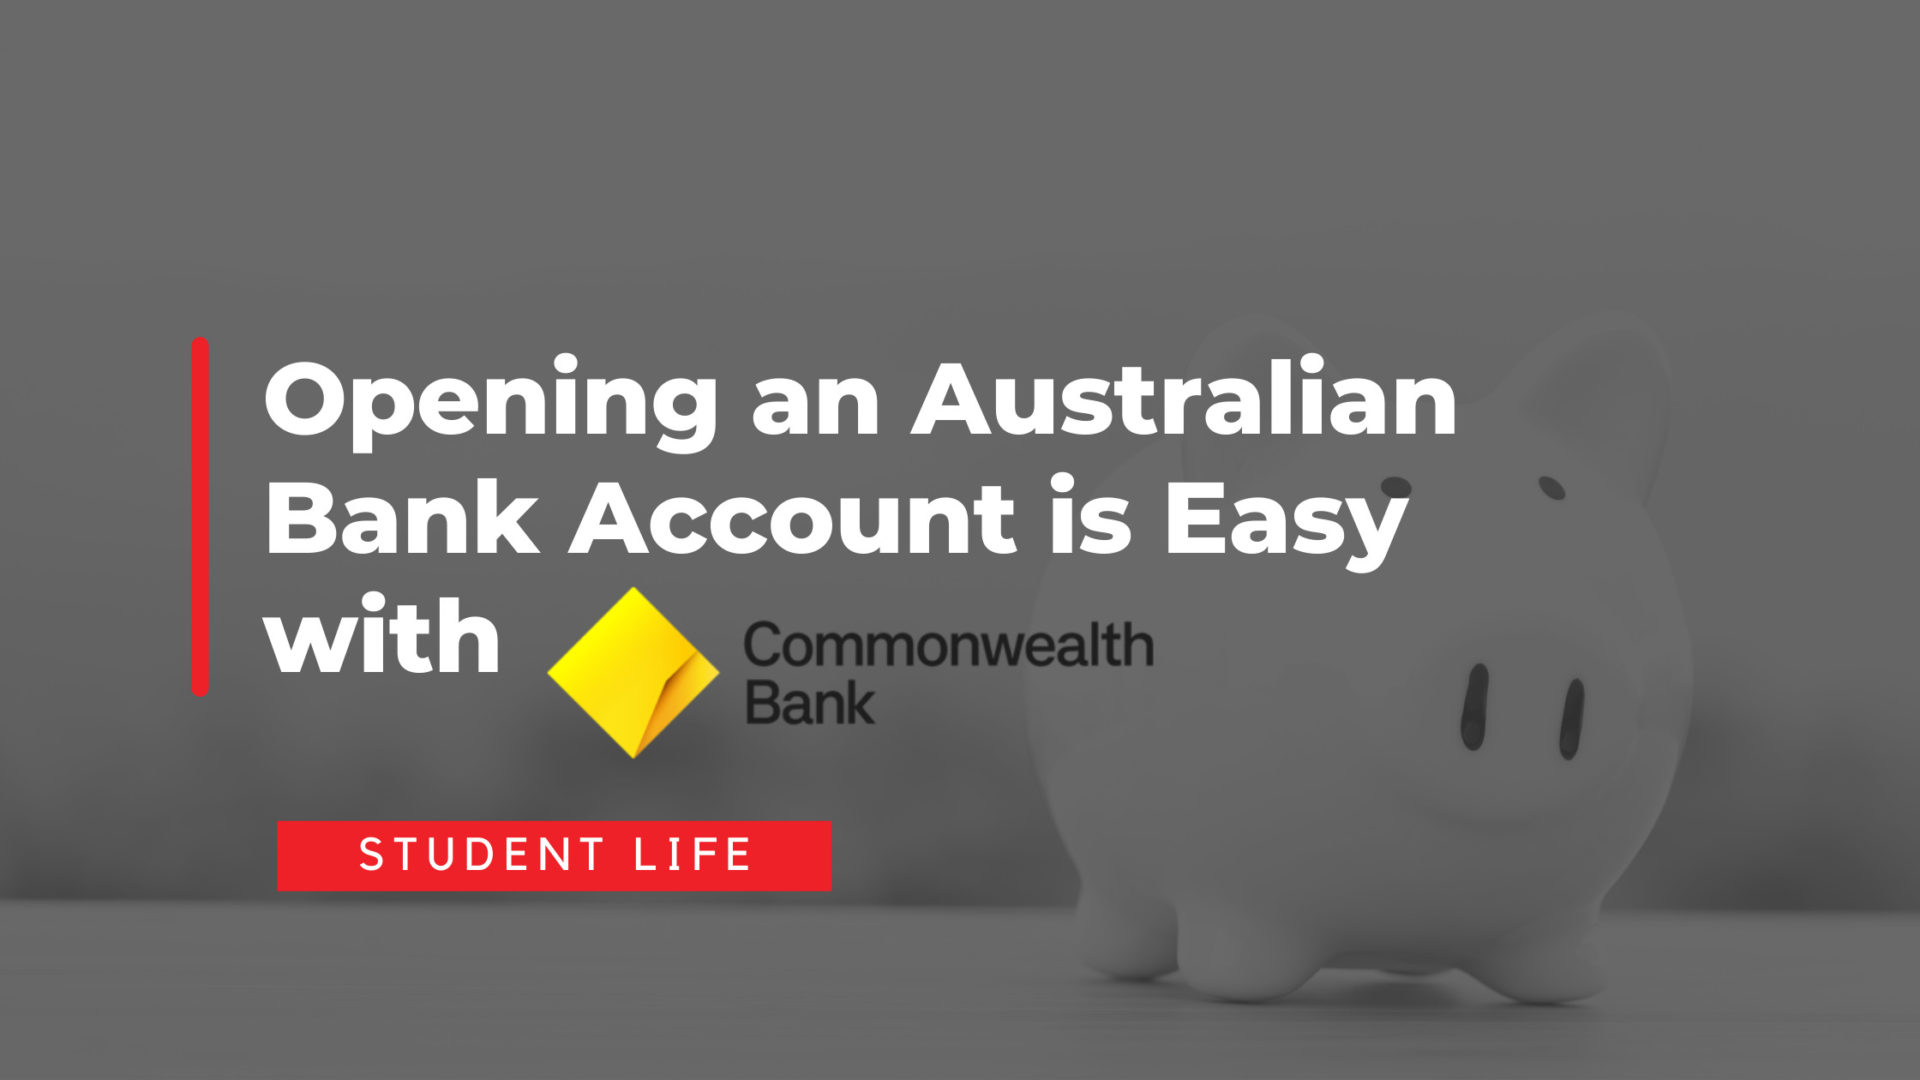 Opening an Australian Bank Account is Easy with Commonwealth Bank